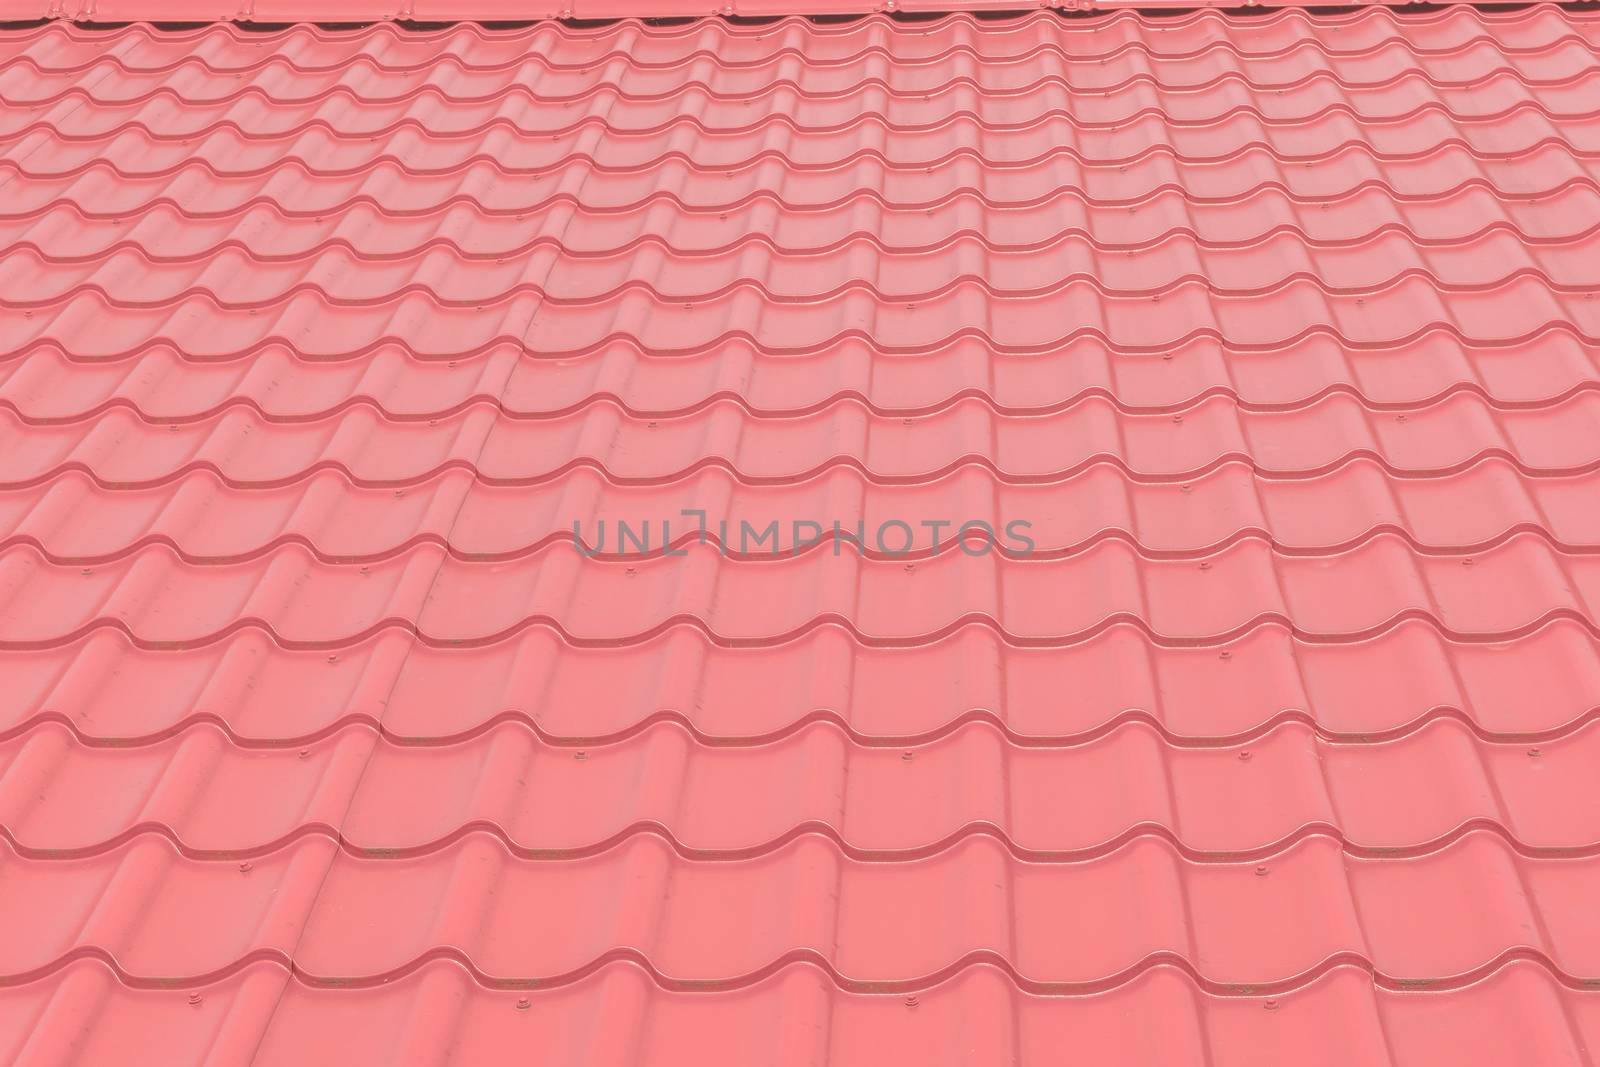 modern bright light pink glossy rooftop tiling texture background by charlottebleijenberg